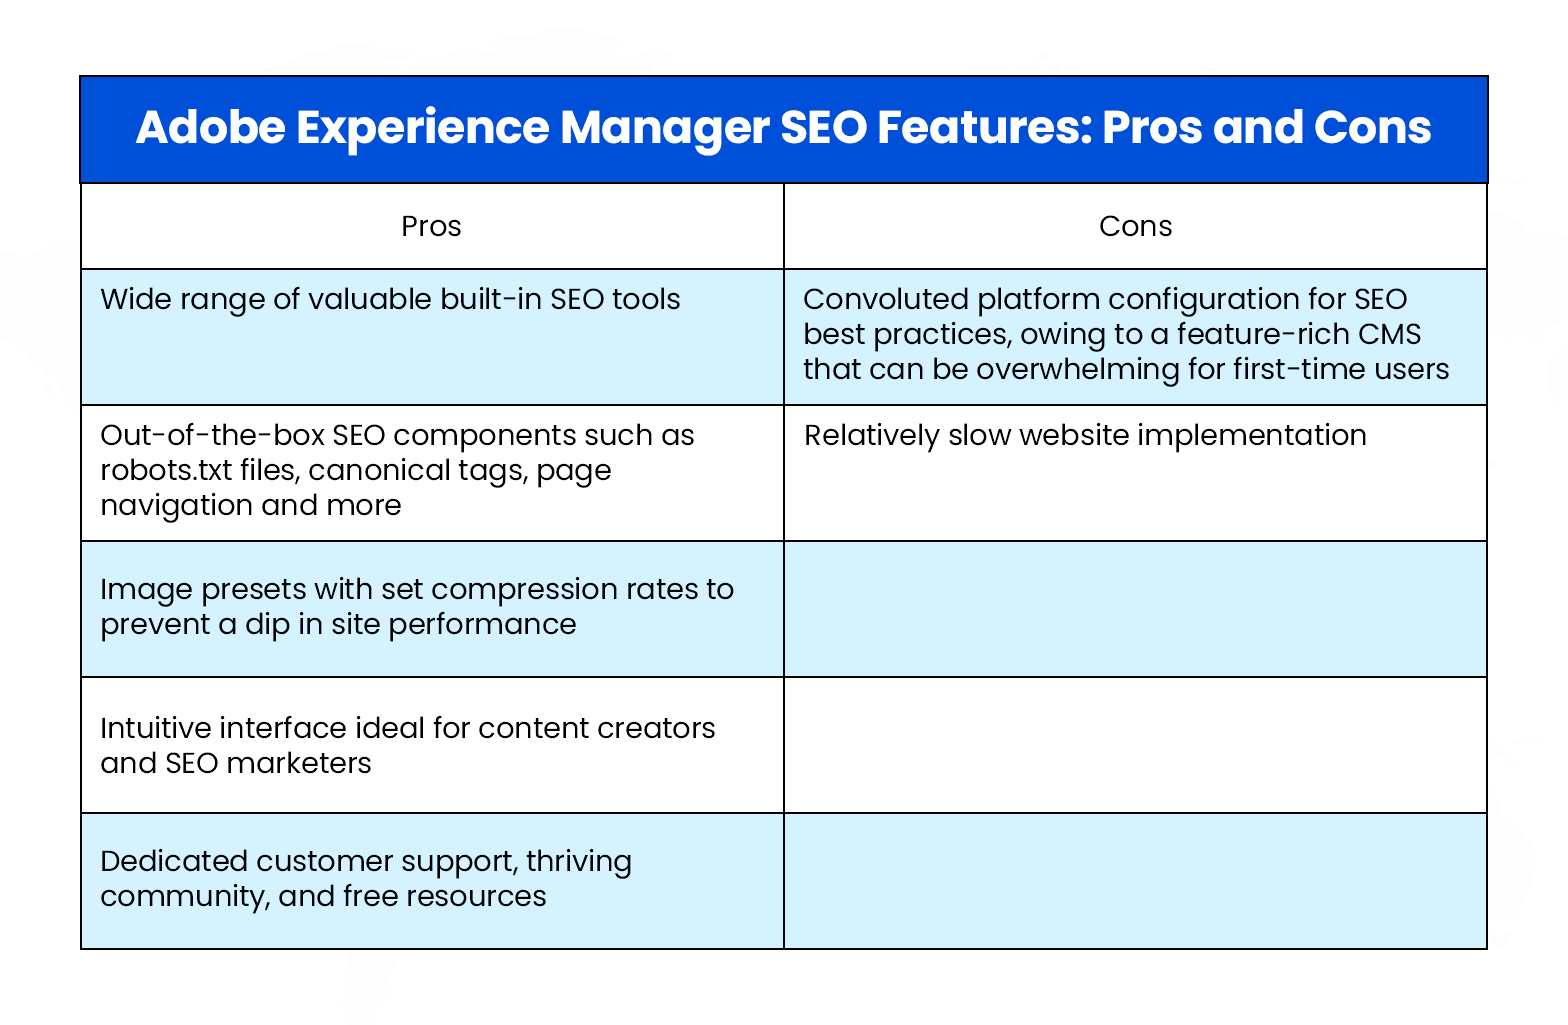 Adobe Experience Manager SEO Features Pros and Cons